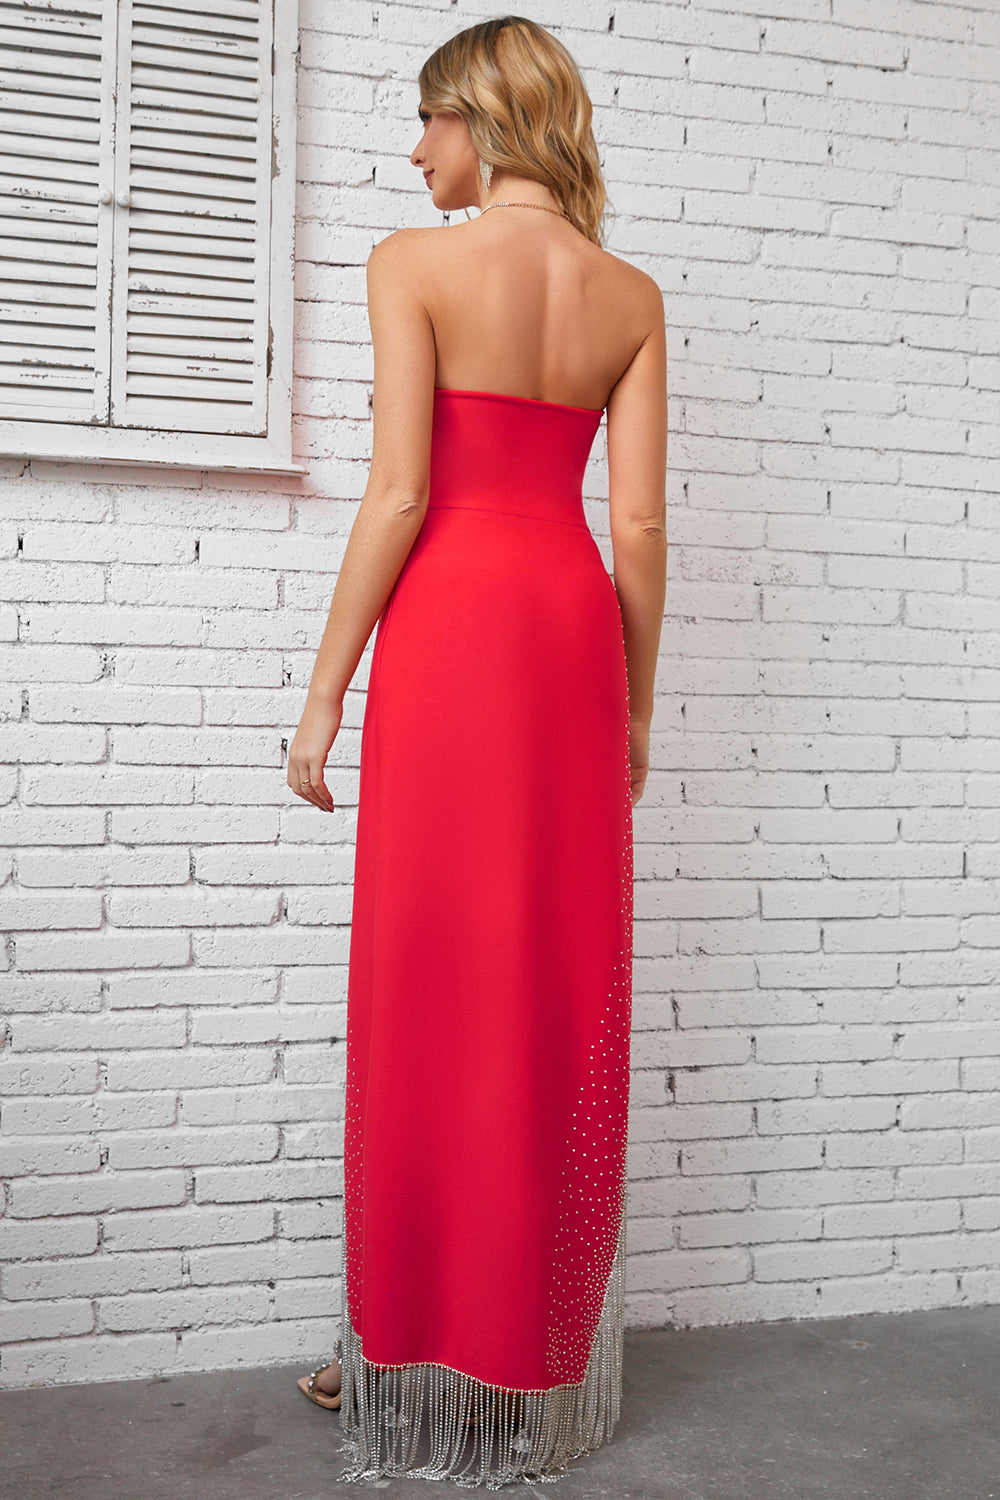 Sesidy Soleil High Low Strapless Dress in Red